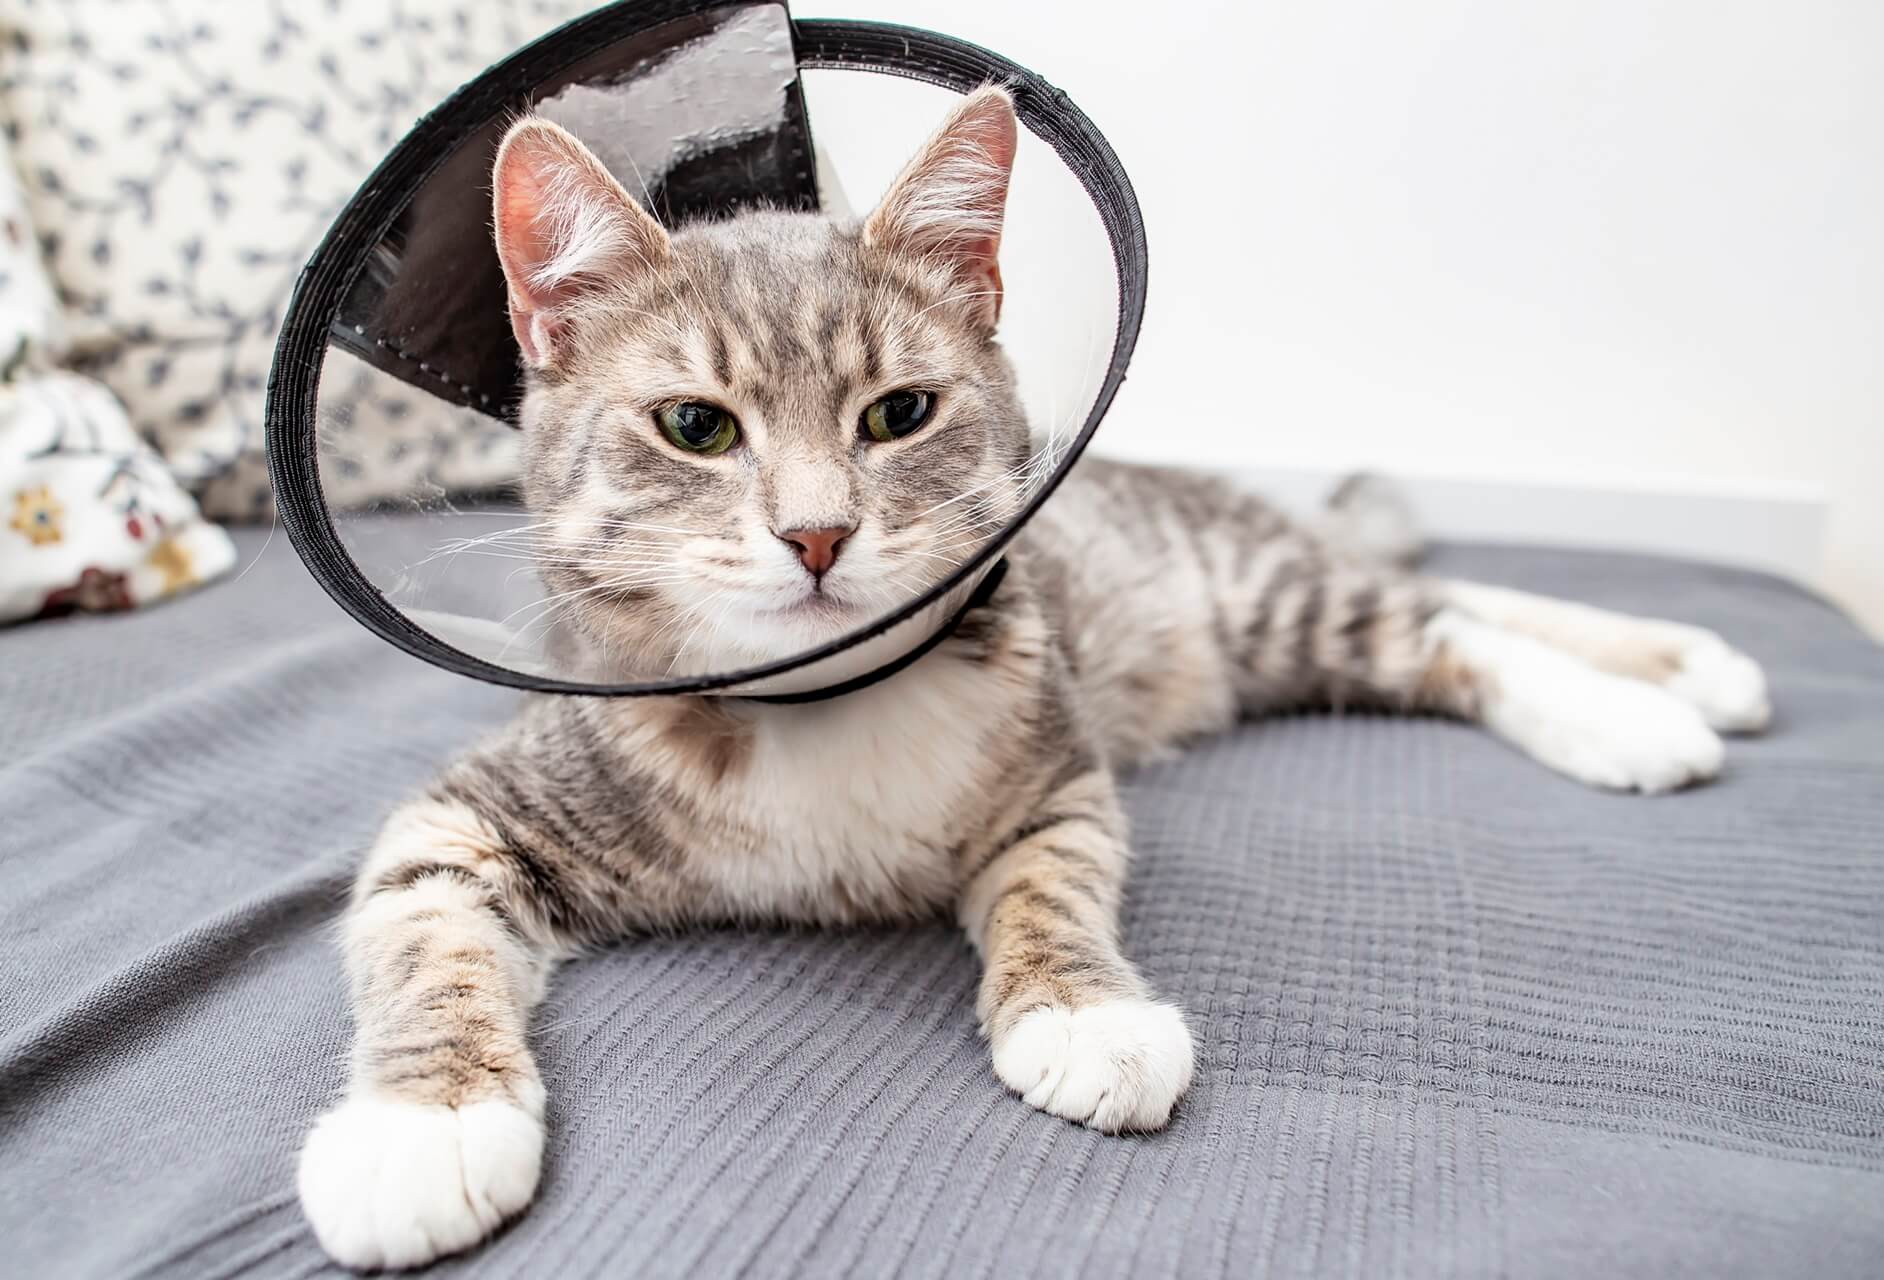 Cat wearing recovery cone